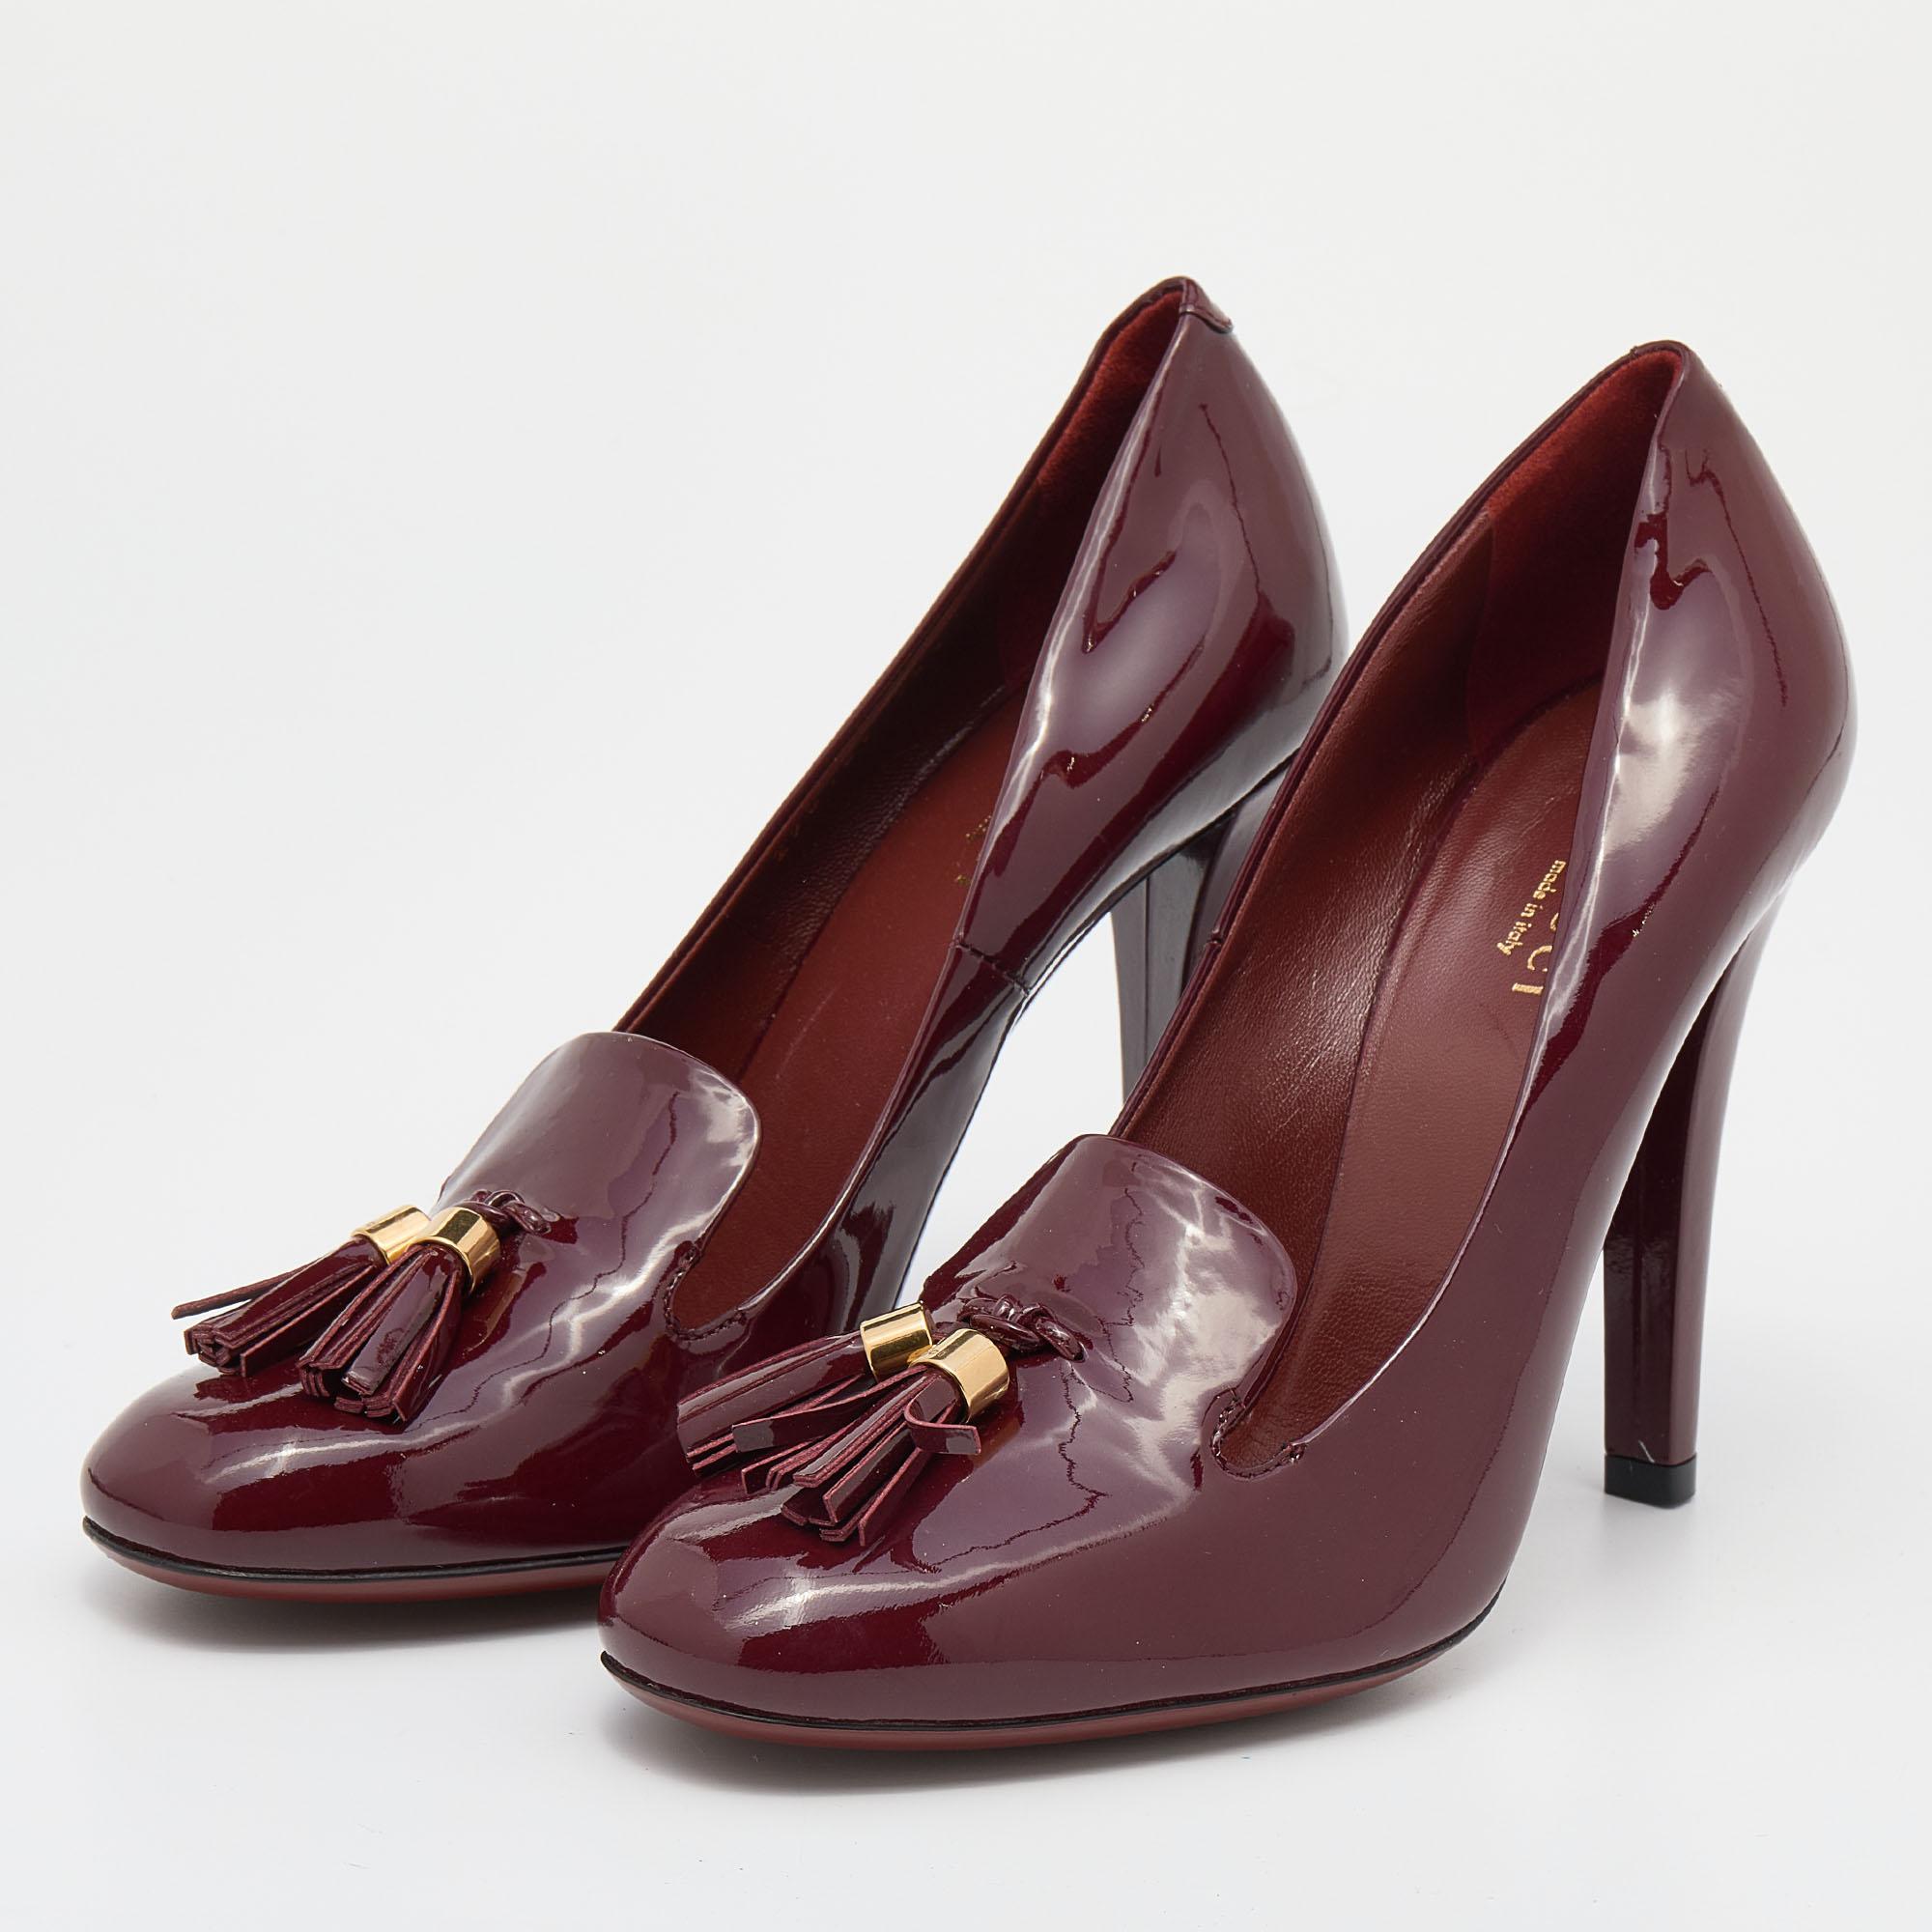 The fusion of loafer and pumps lend this Gucci pair a striking appeal. A classy creation, it comes crafted from patent leather and adorned with tassel detailing on the uppers. The 11.5cm heels of these shoes will add an extra edge to your outfit.